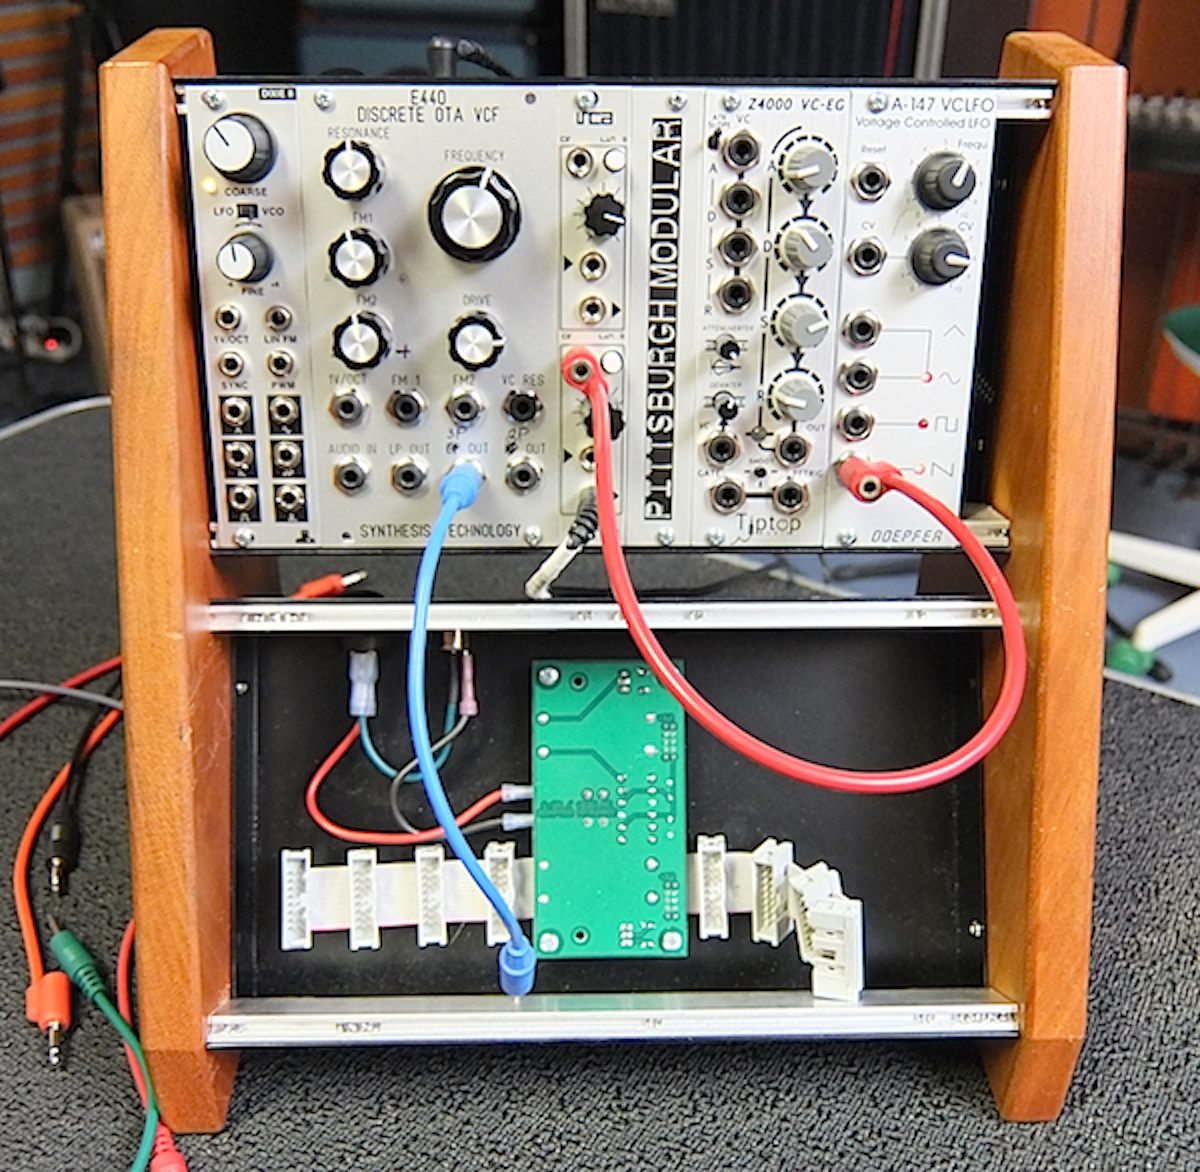 Hill used this smaller Eurorack setup to demonstrate how to build a sound on a synthesizer.